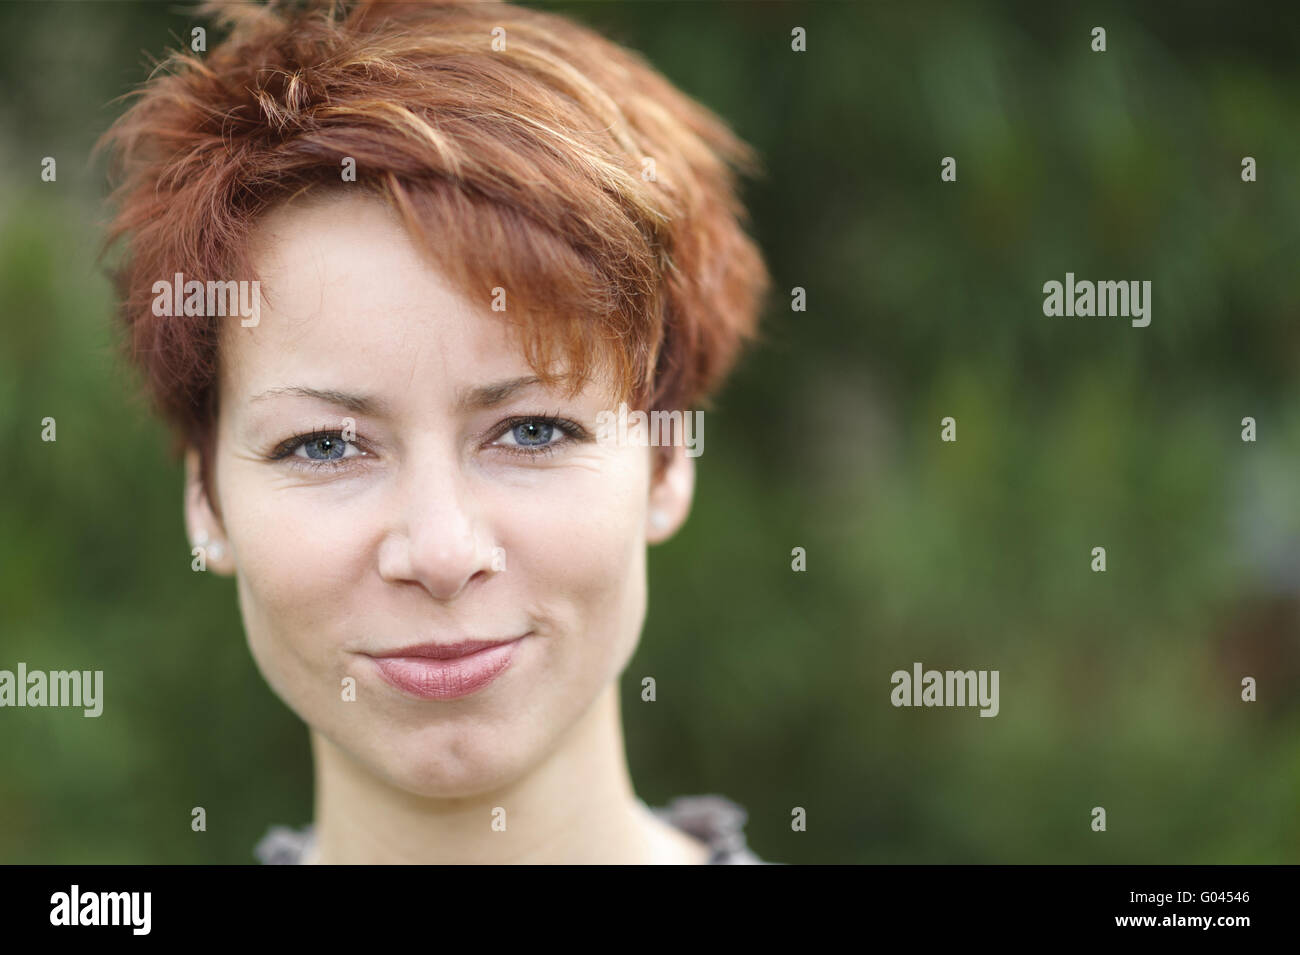 Portrait of a tomboyish young woman with red hair Stock Photo